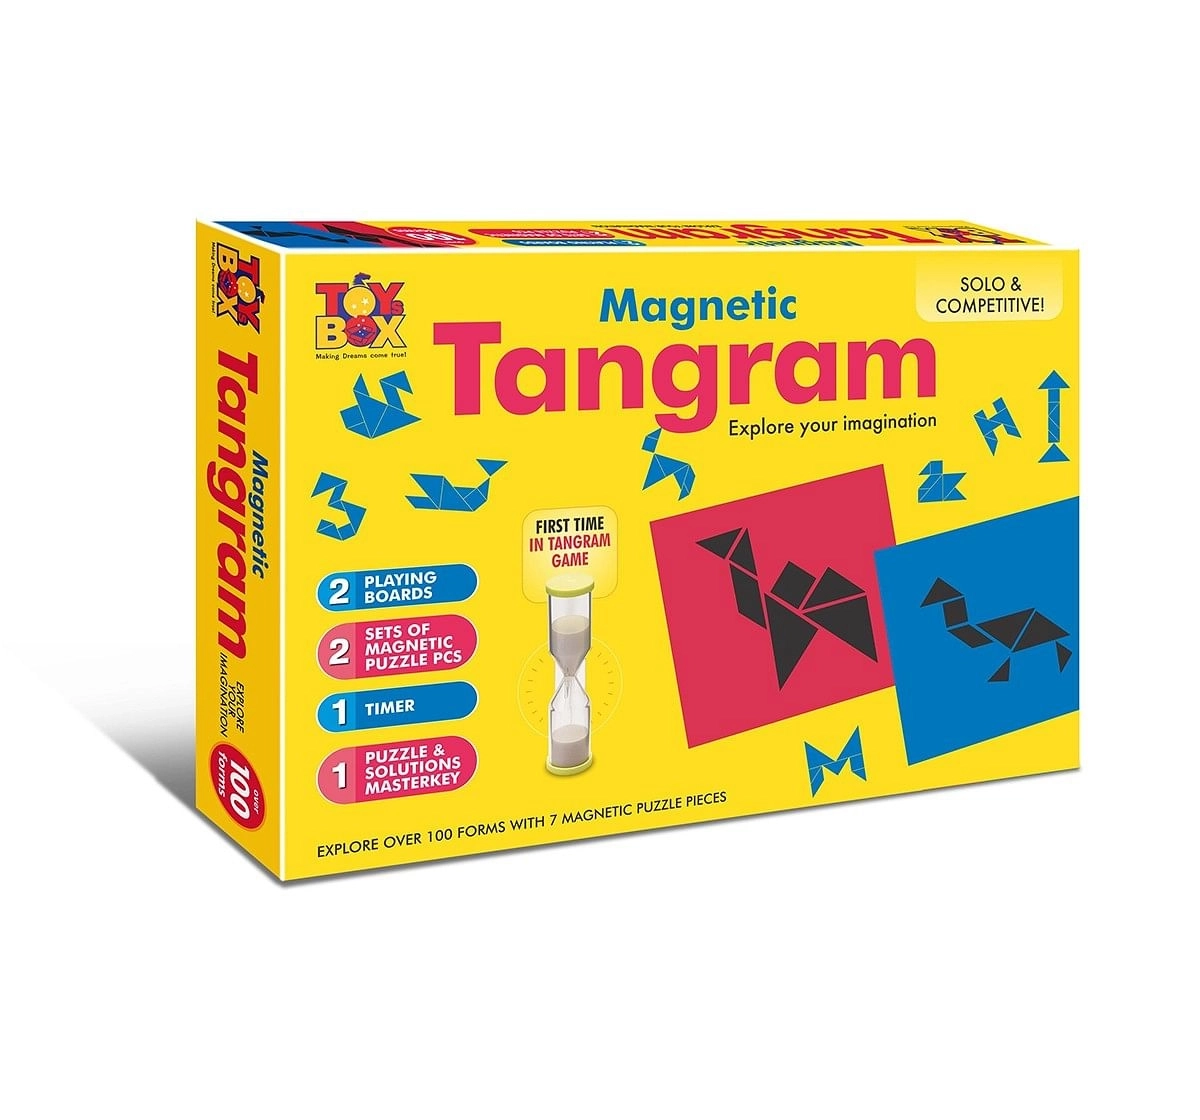  Toysbox Magnetic Tangram Board Games for Kids age 6Y+ 